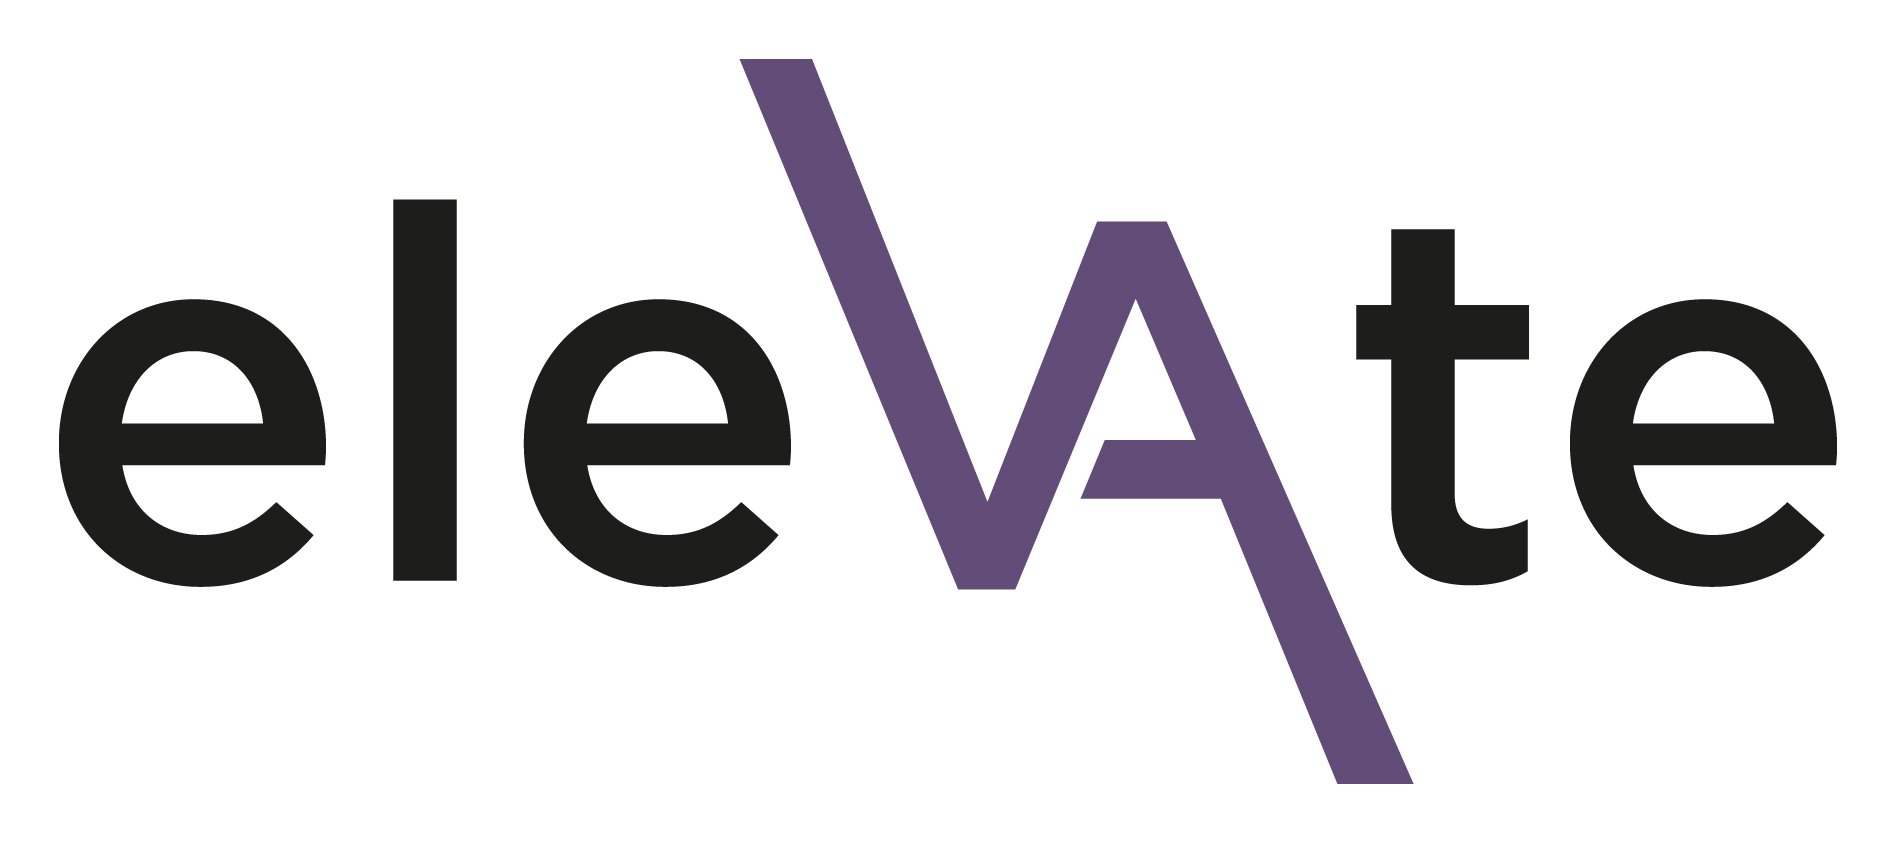 elevate logo png